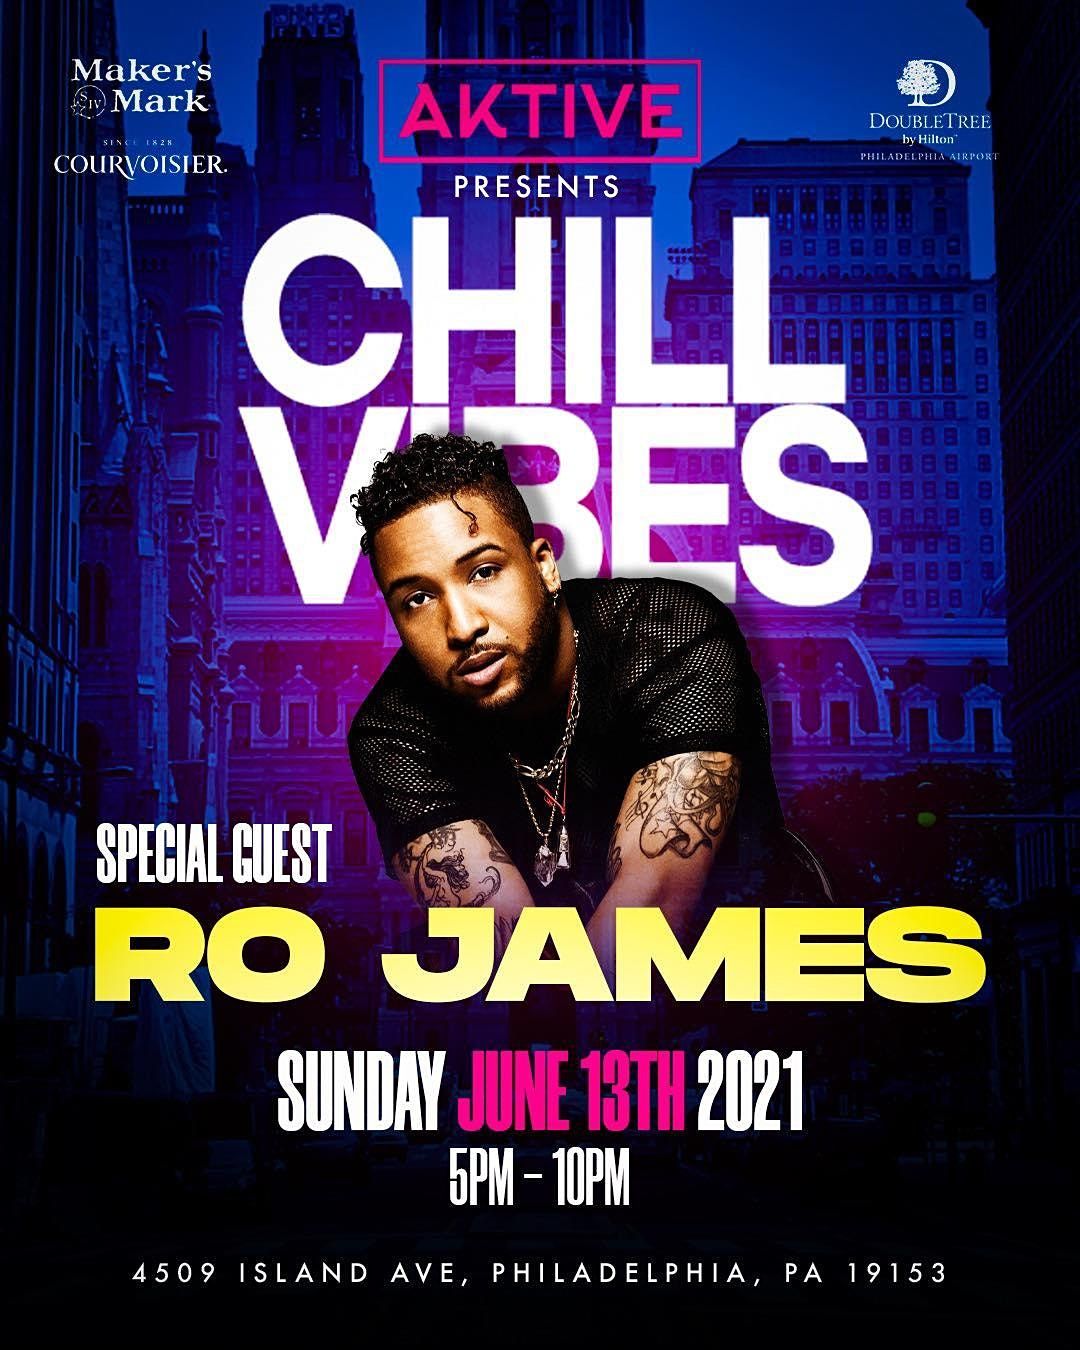 Chill Vibes Live featuring Ro James x Bri Steves x JustFrenchie